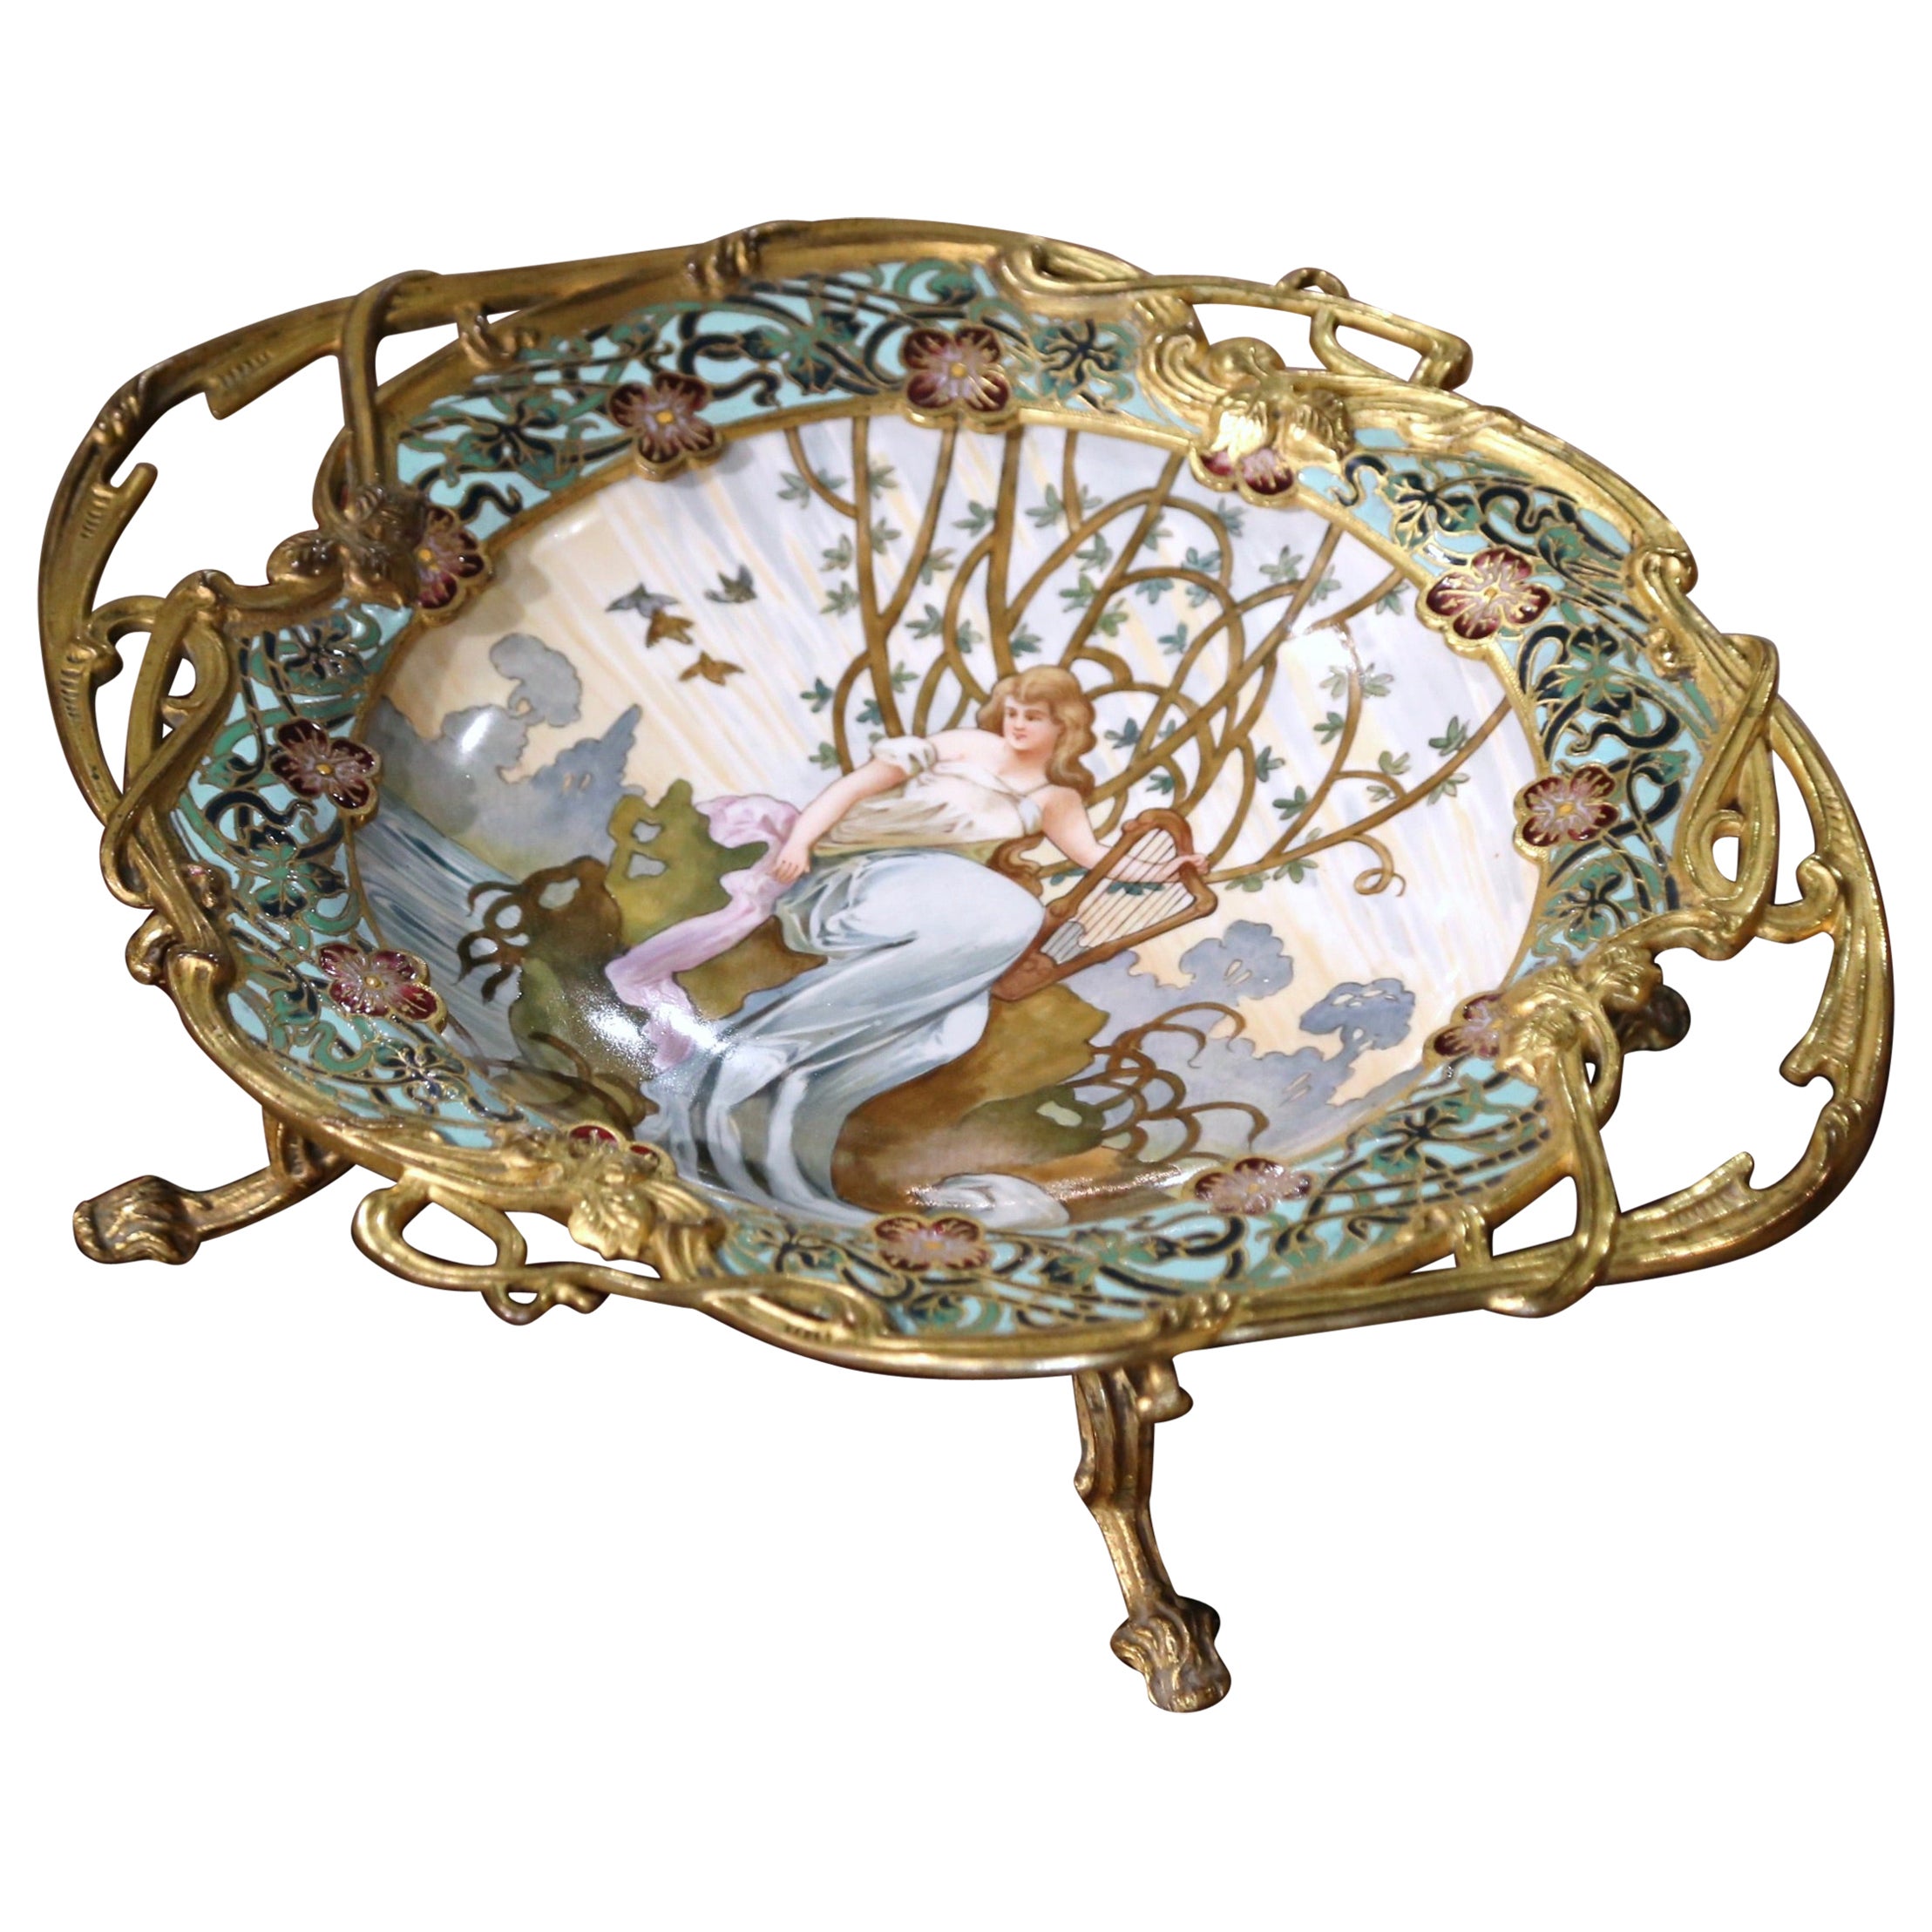 19th Century French Champlevé Enamel and Porcelain Centerpiece Signed Tisserand For Sale